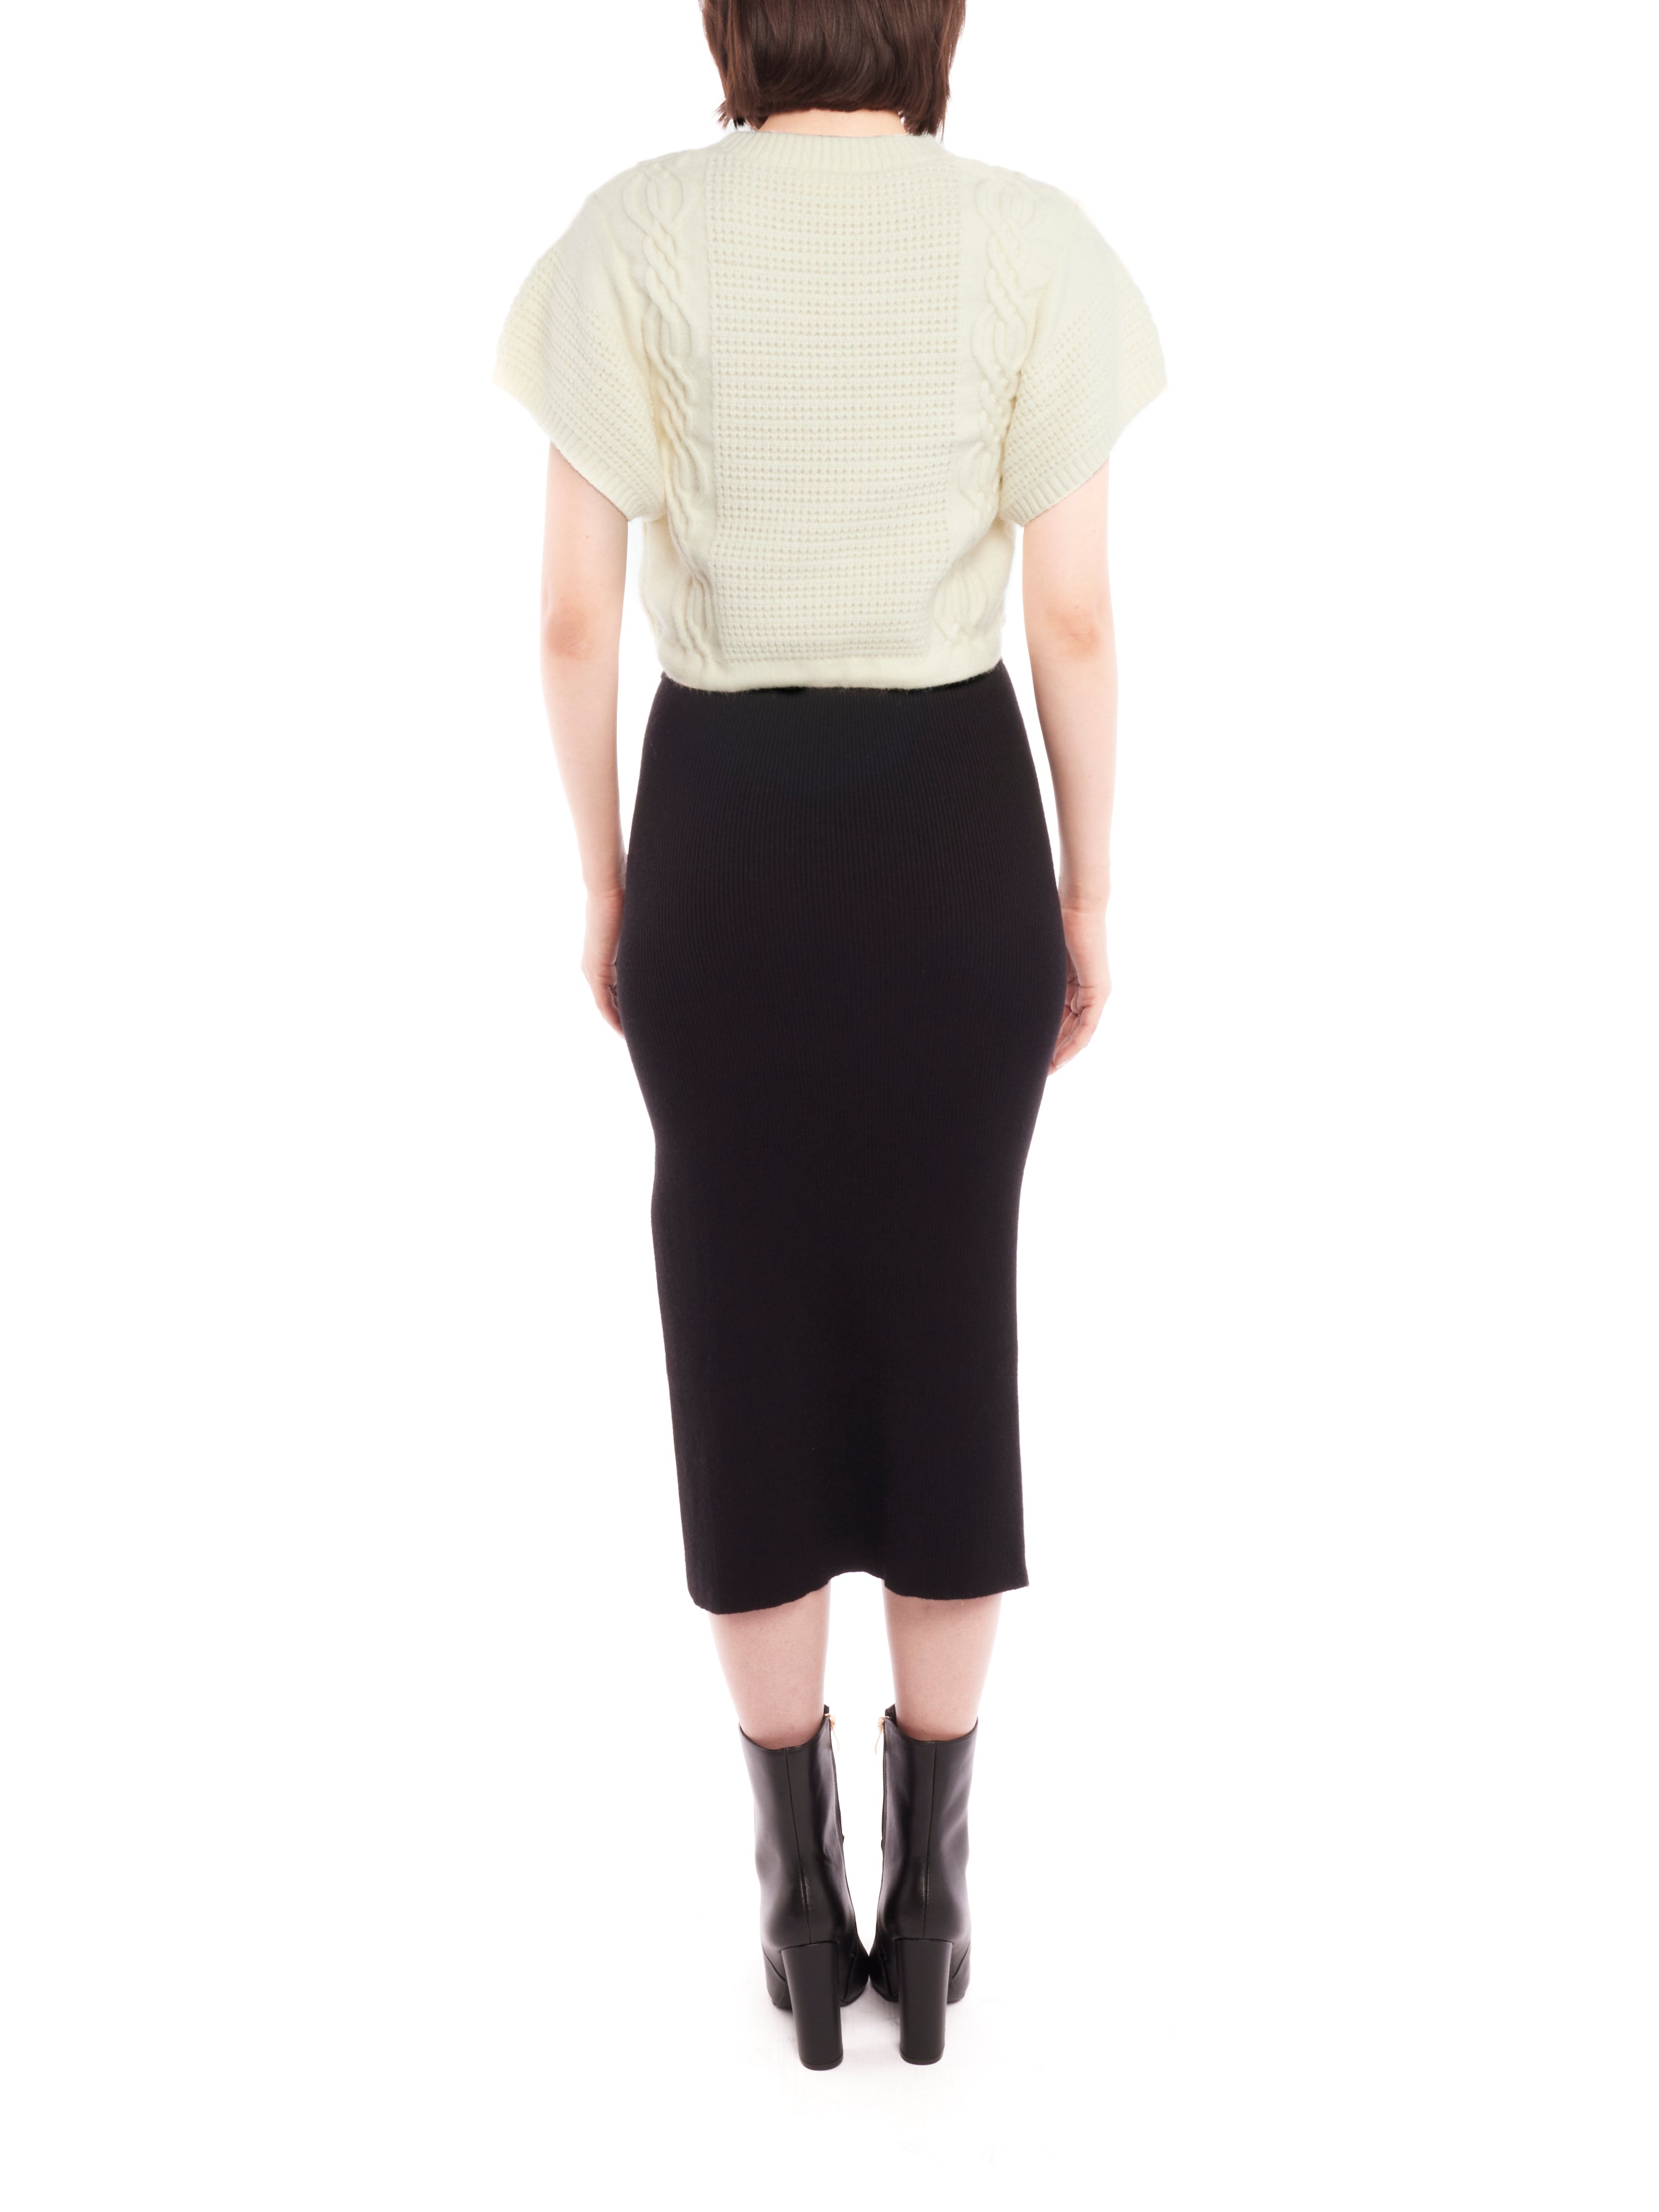 Cropped cable knit, short sleeve sweater with a drawstring, adjustable cinched waist - back view